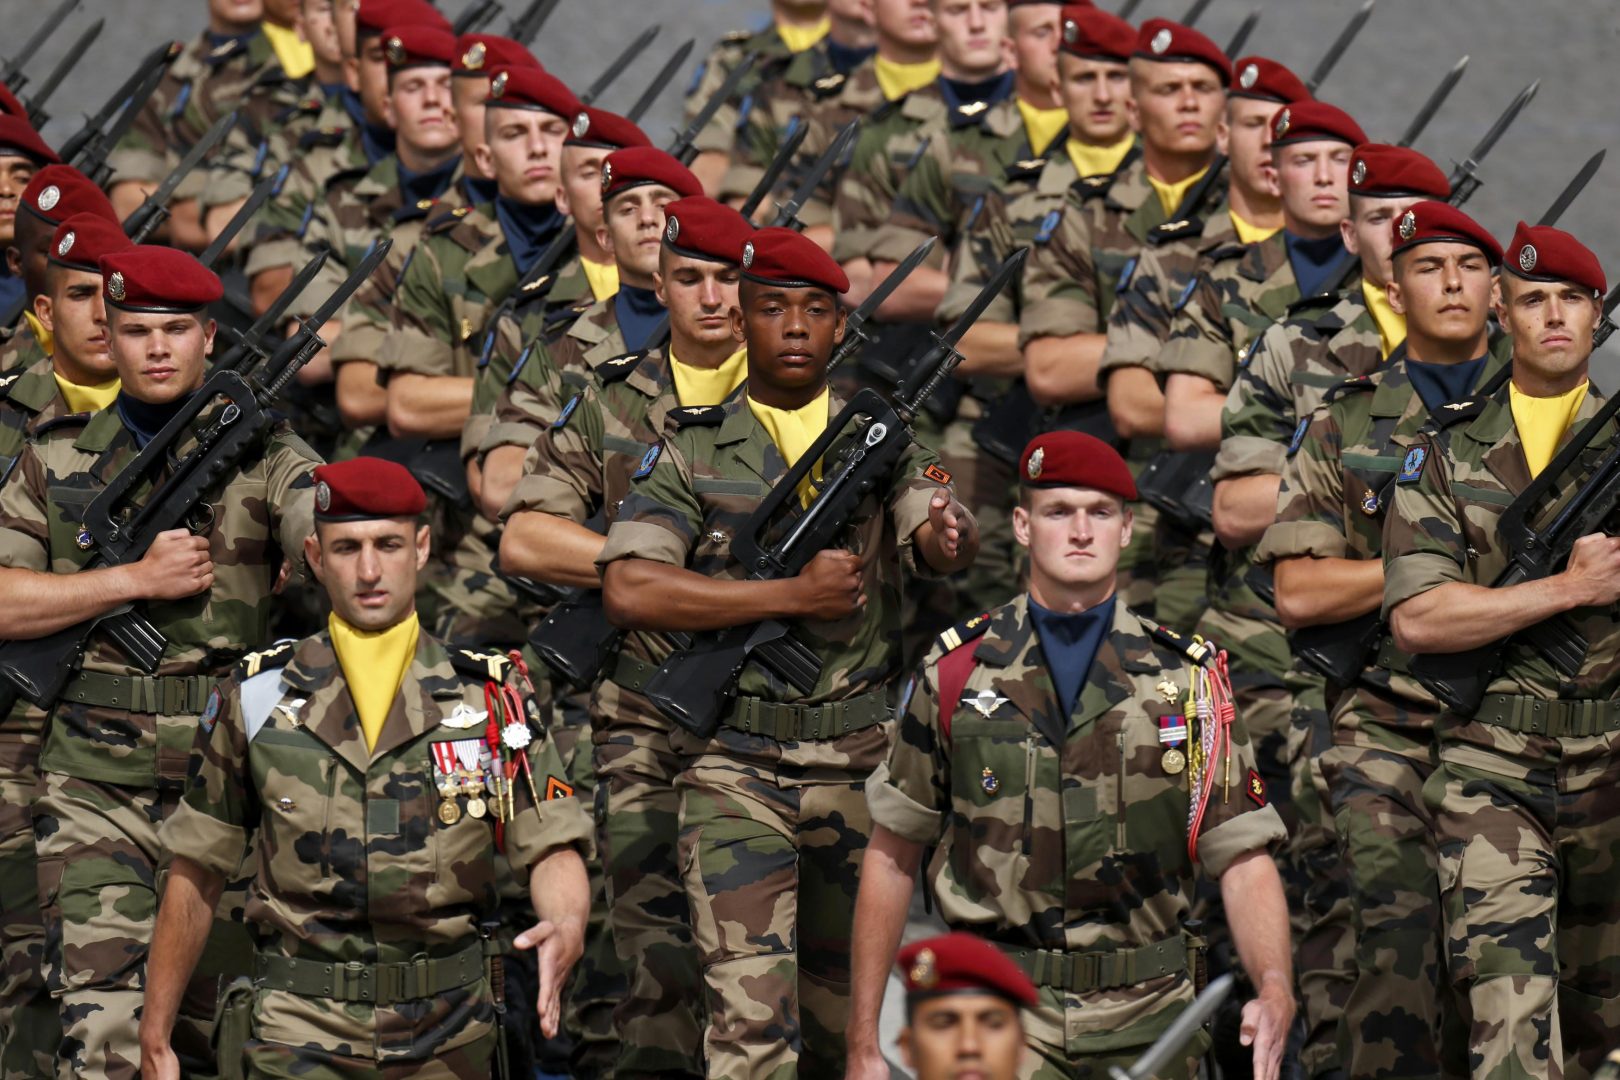 ANALIZA: The European Security Force – a step-by-step approach towards an European Army?